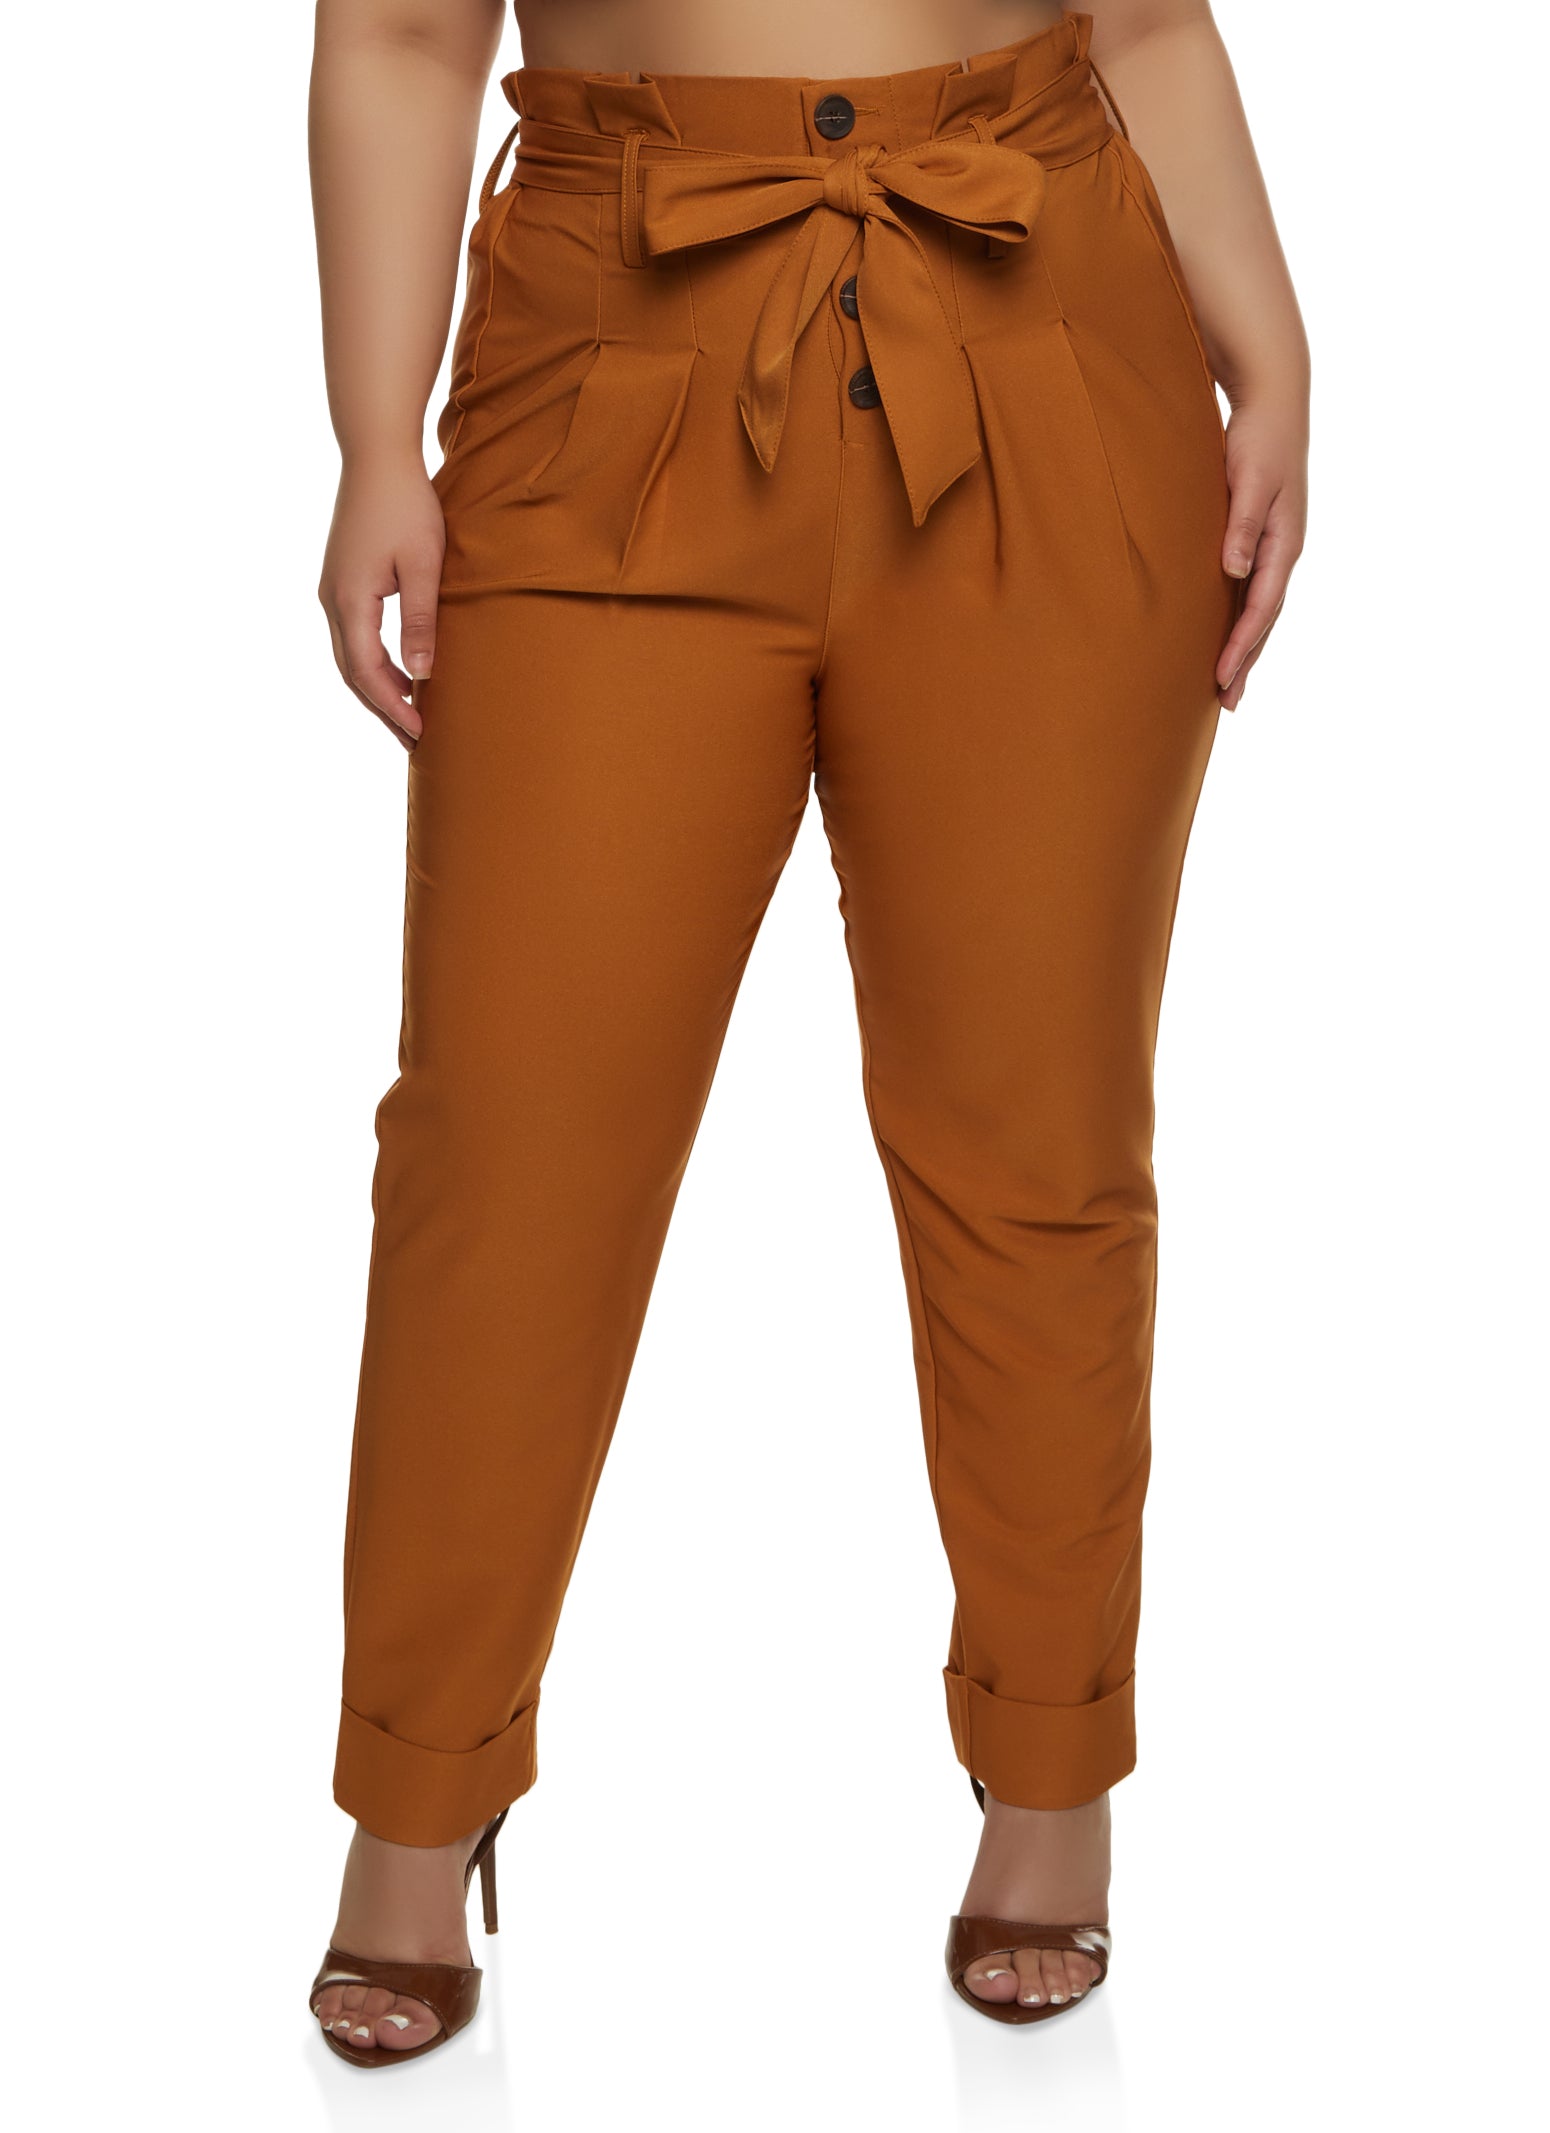 Shop Plus Size Everyday Crushed Crop Pant in Brown